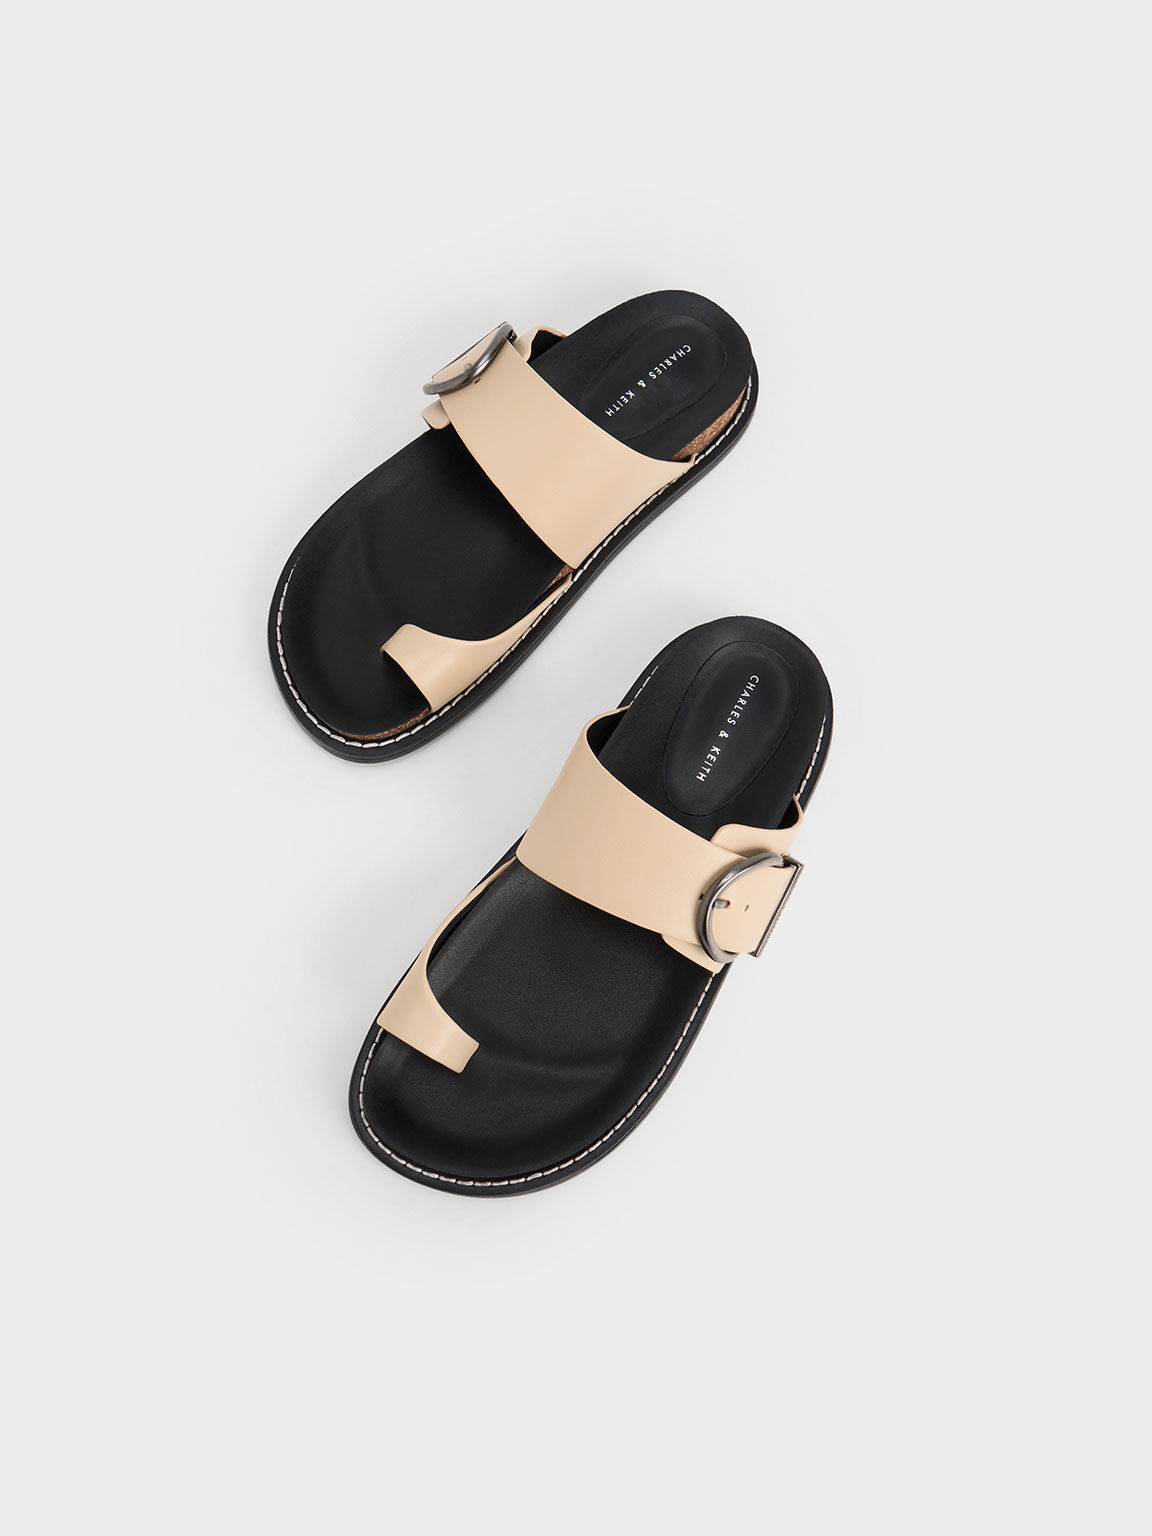 Sand Metallic Buckle Toe-Ring Sandals - CHARLES & KEITH US